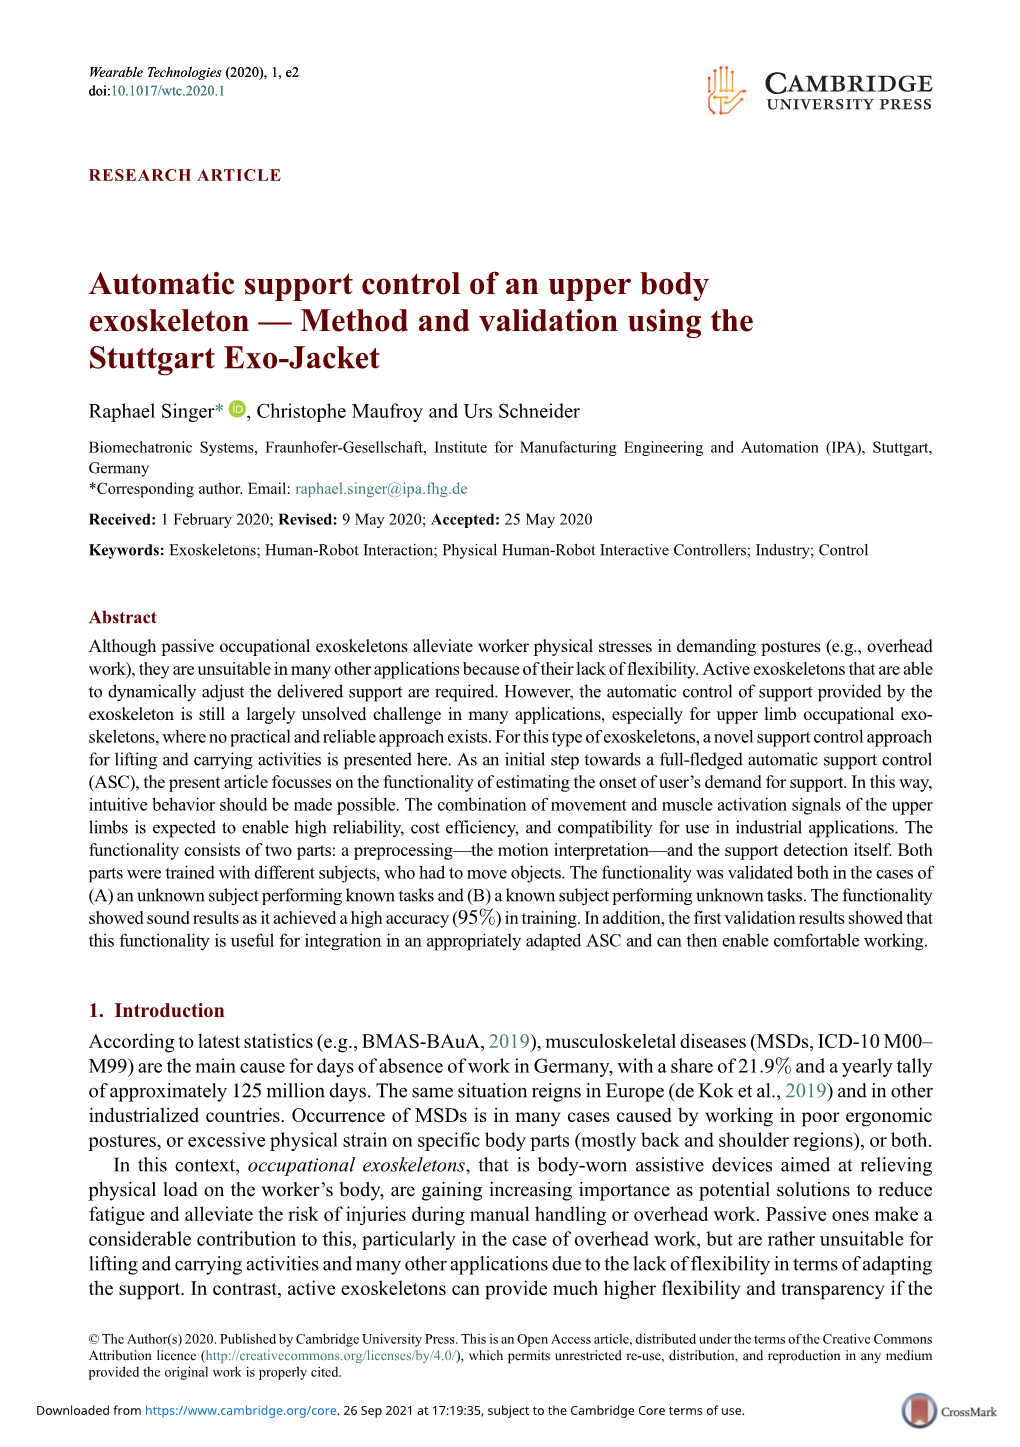 Automatic Support Control of an Upper Body Exoskeleton — Method and Validation Using the Stuttgart Exo-Jacket